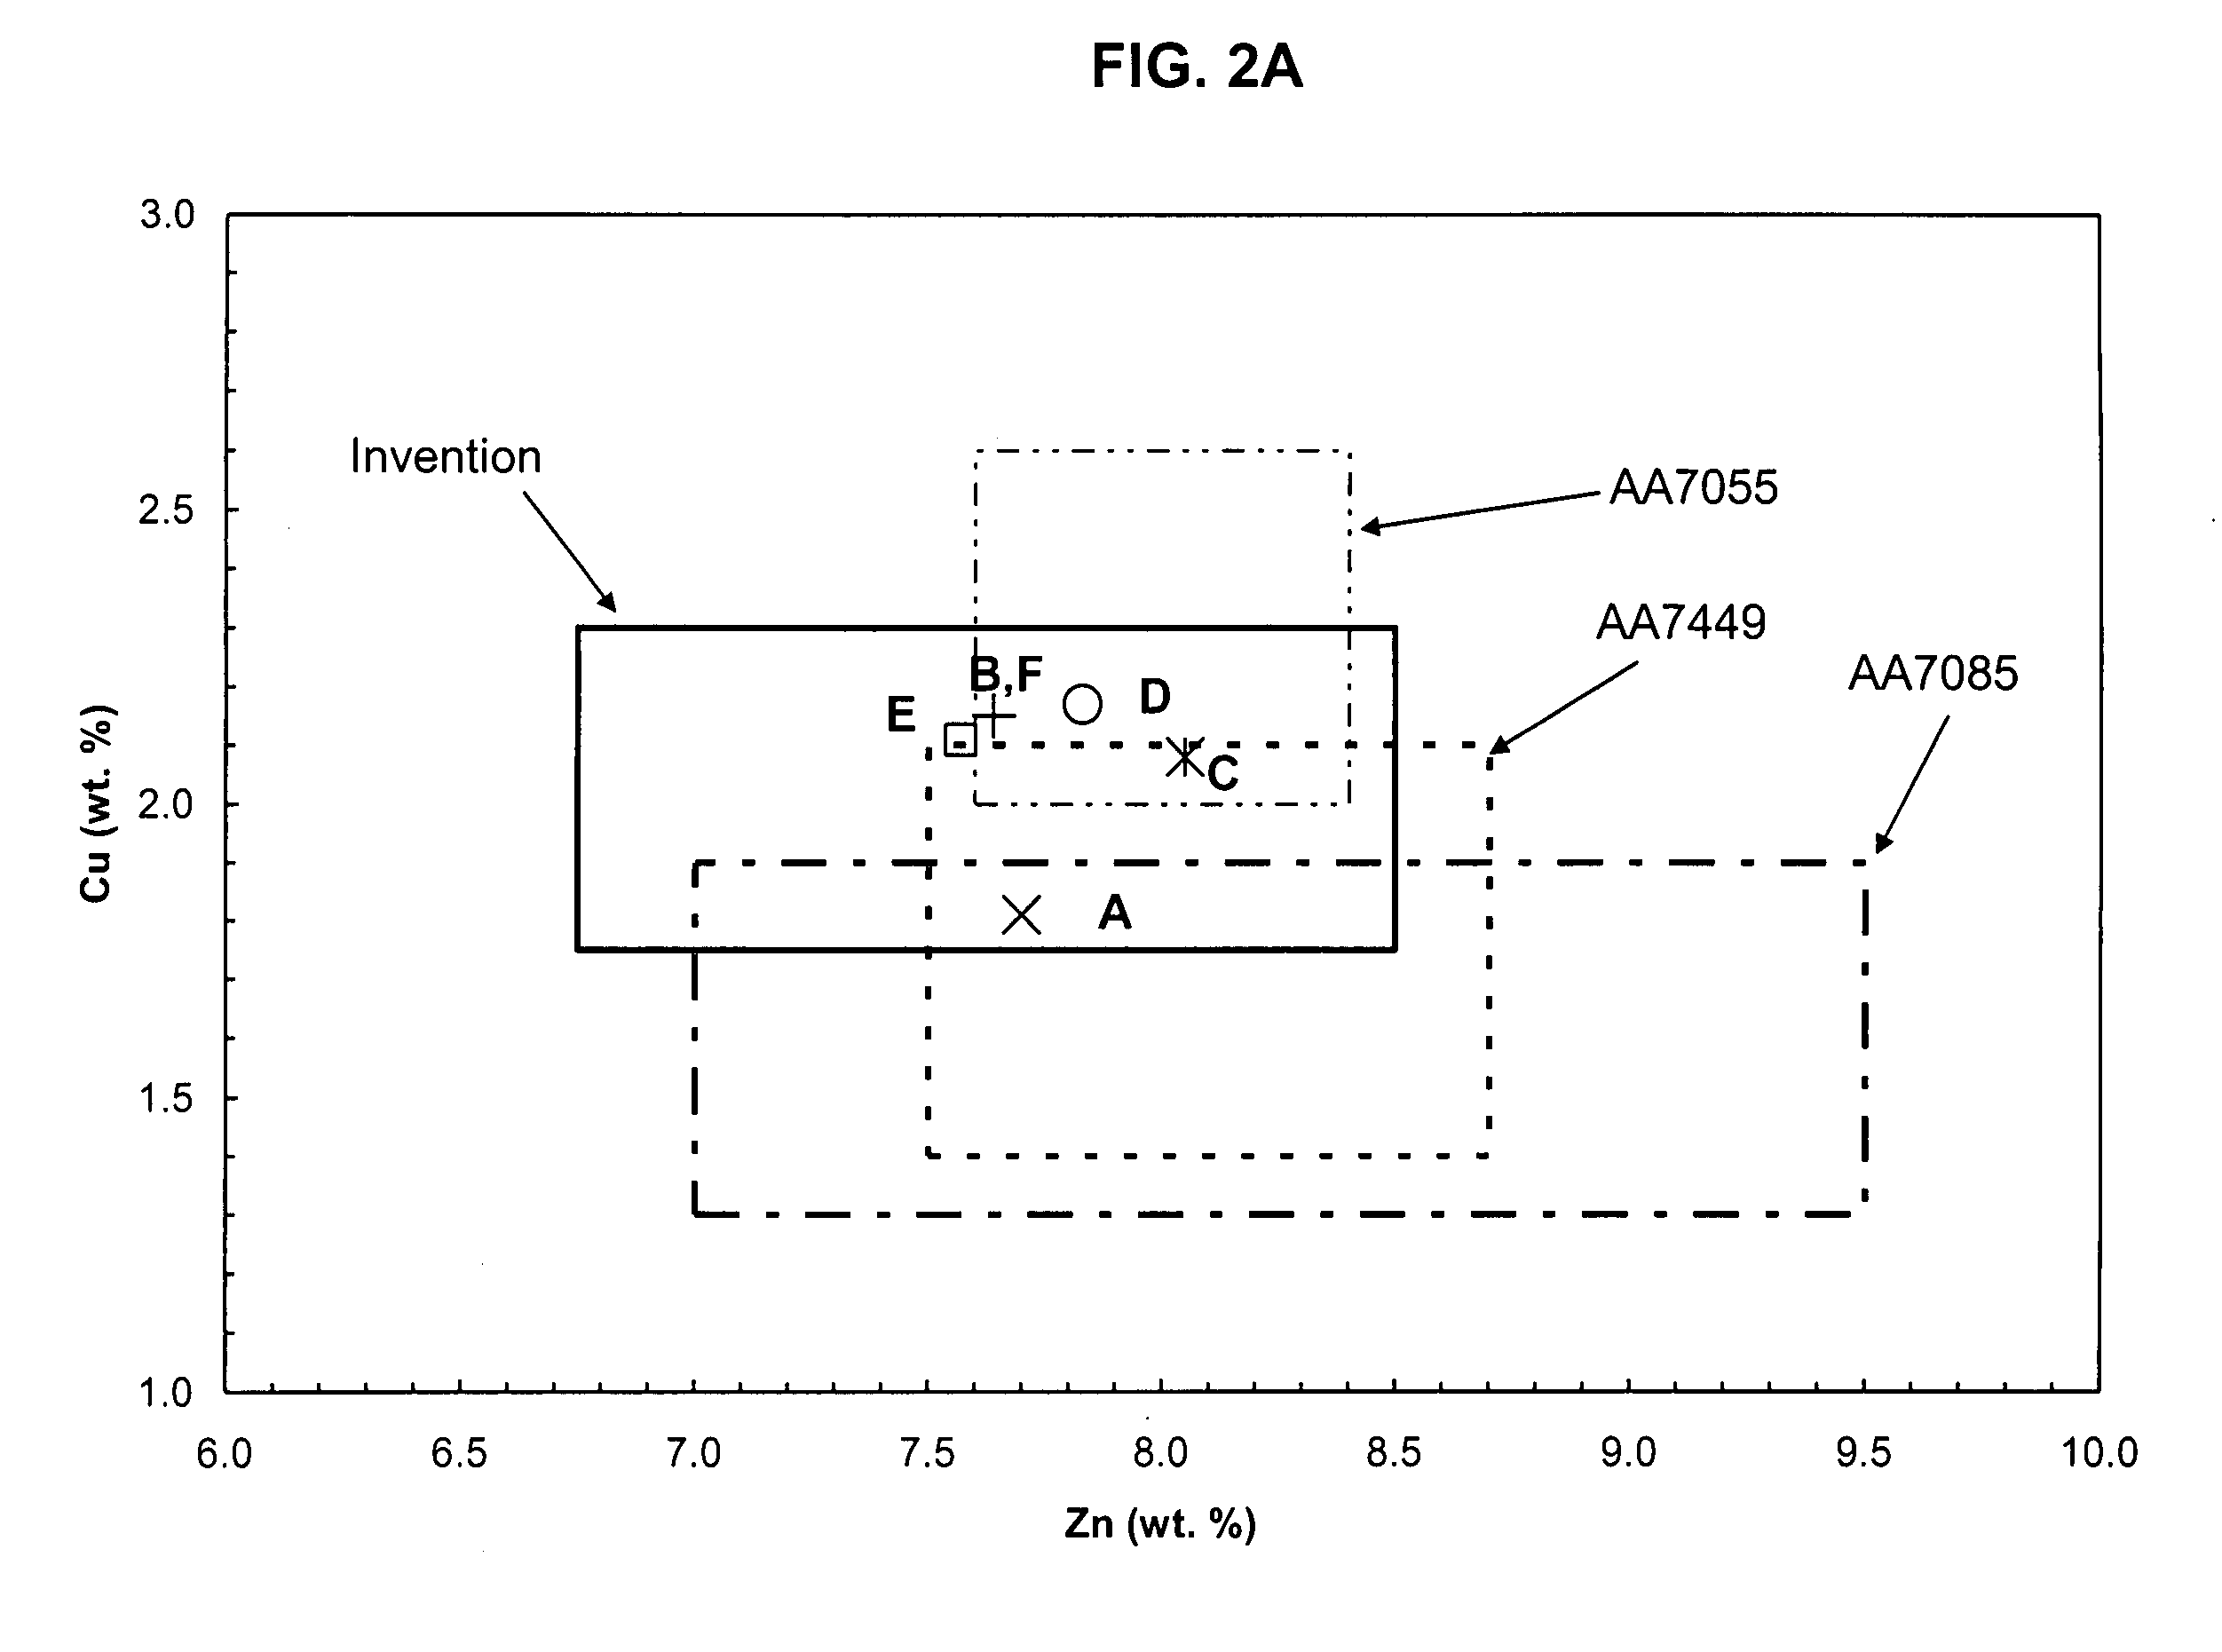 Aluminum alloy products having improved property combinations and method for artificially aging same